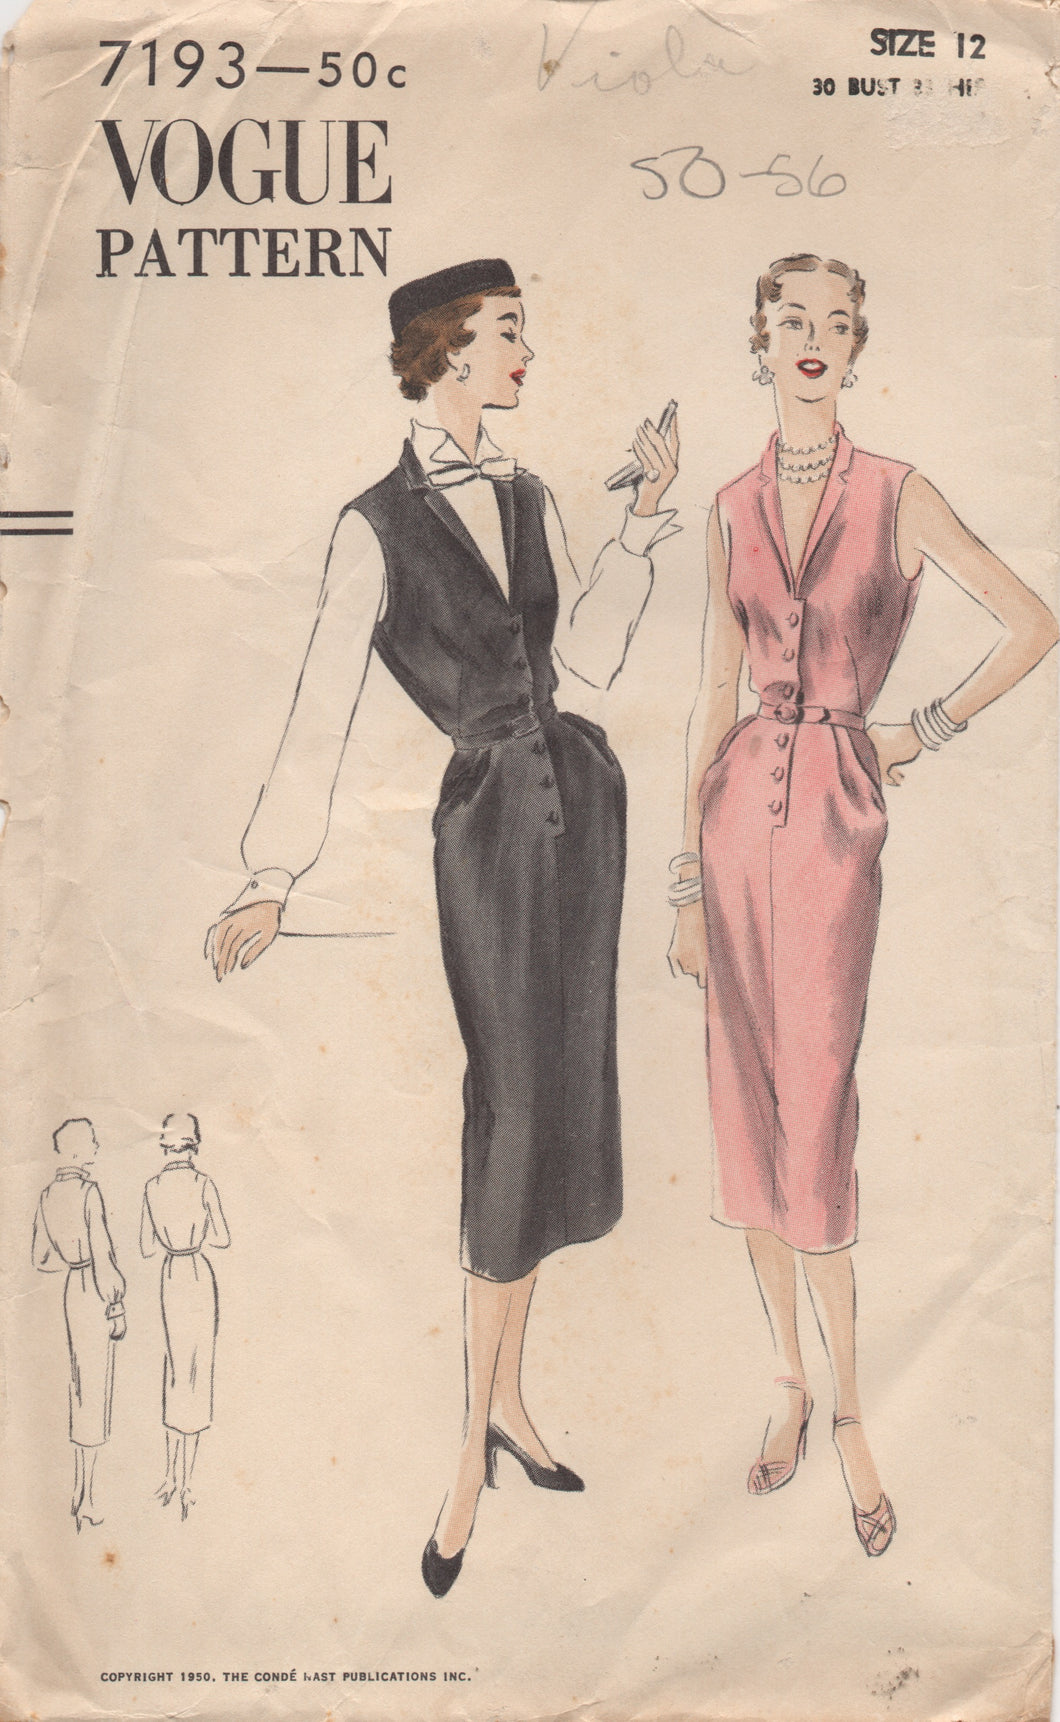 1950's Vogue One Piece Jumper Dress Pattern with Button Front and Soft Pleats - Bust 30